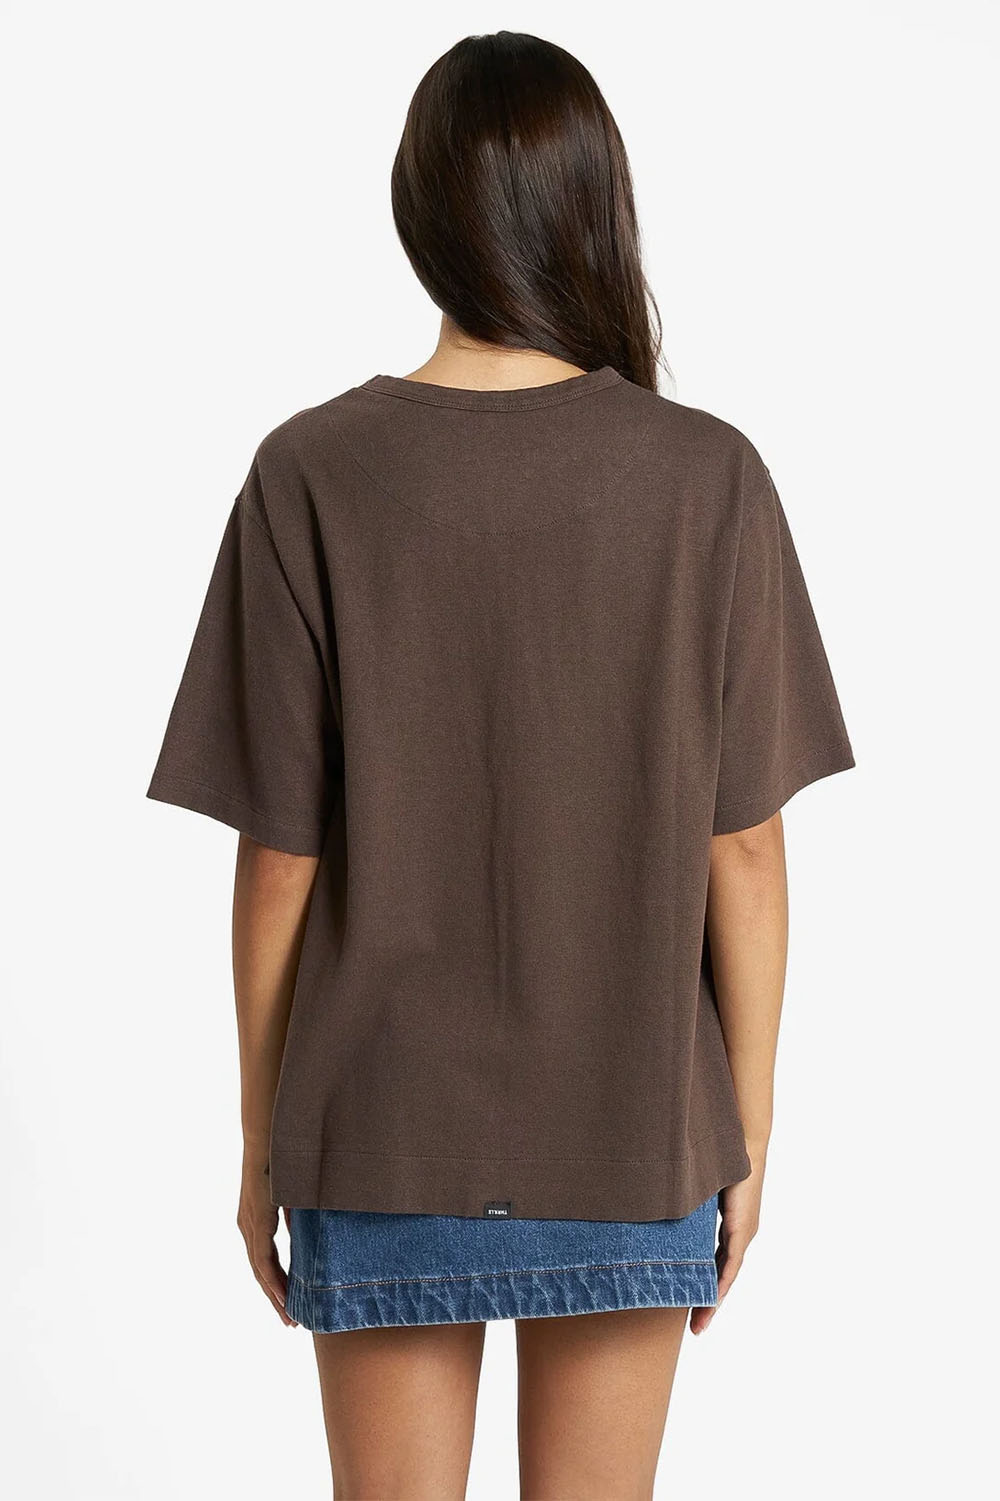 Thrills - Physical Existence Box Tee - Postal Brown - Back